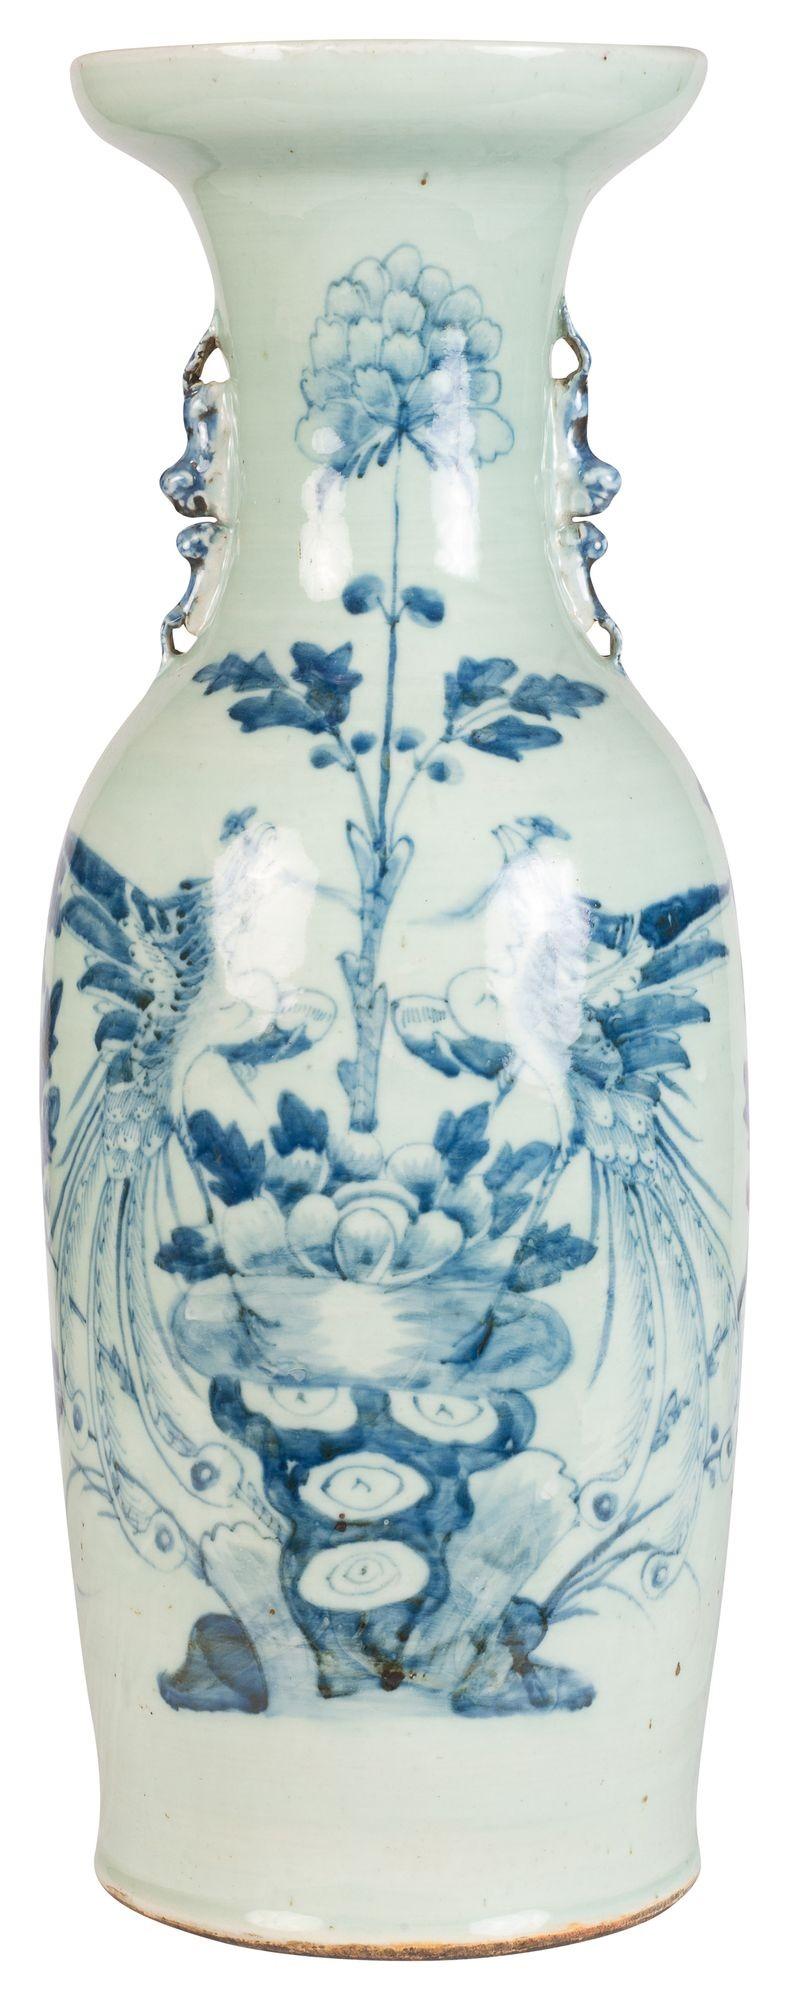 A decorative late 19th Century Chinese export blue and white vase / lamp. Having wonderful flower and leaf decoration and mythical Foo dog handles to the sides.
Batch 74


